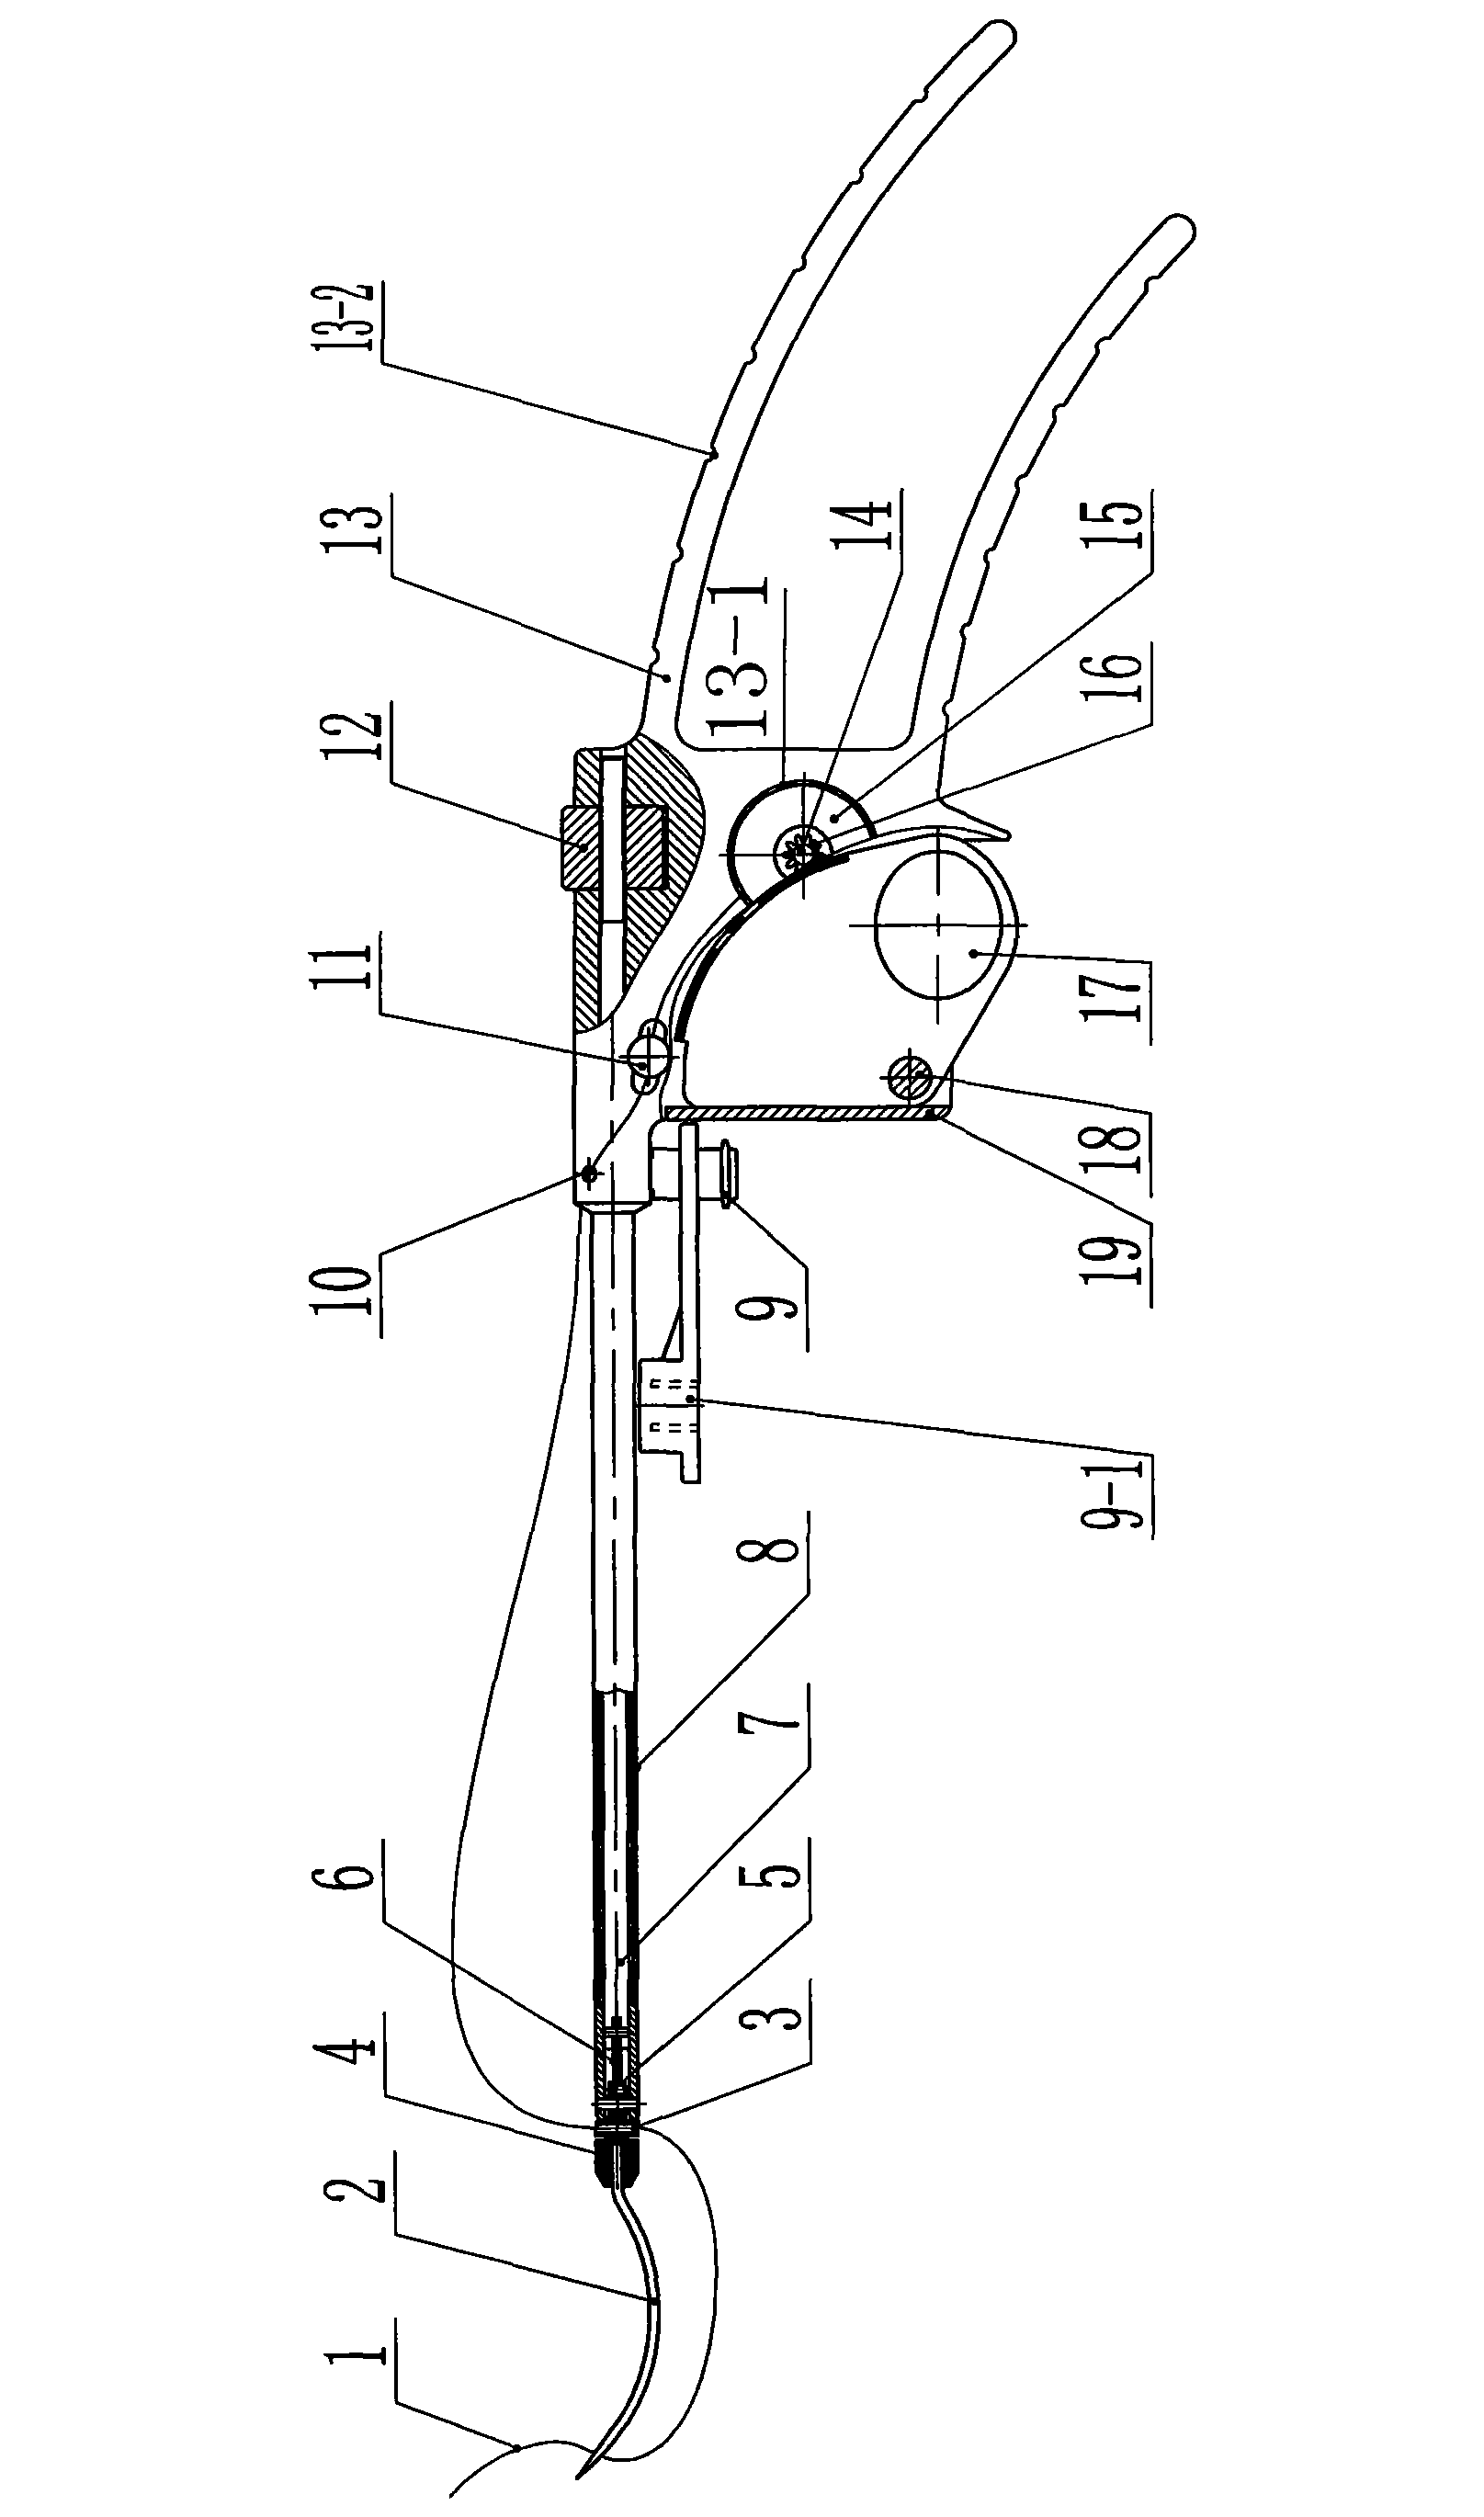 Endoscopic sewing and knot tying machine